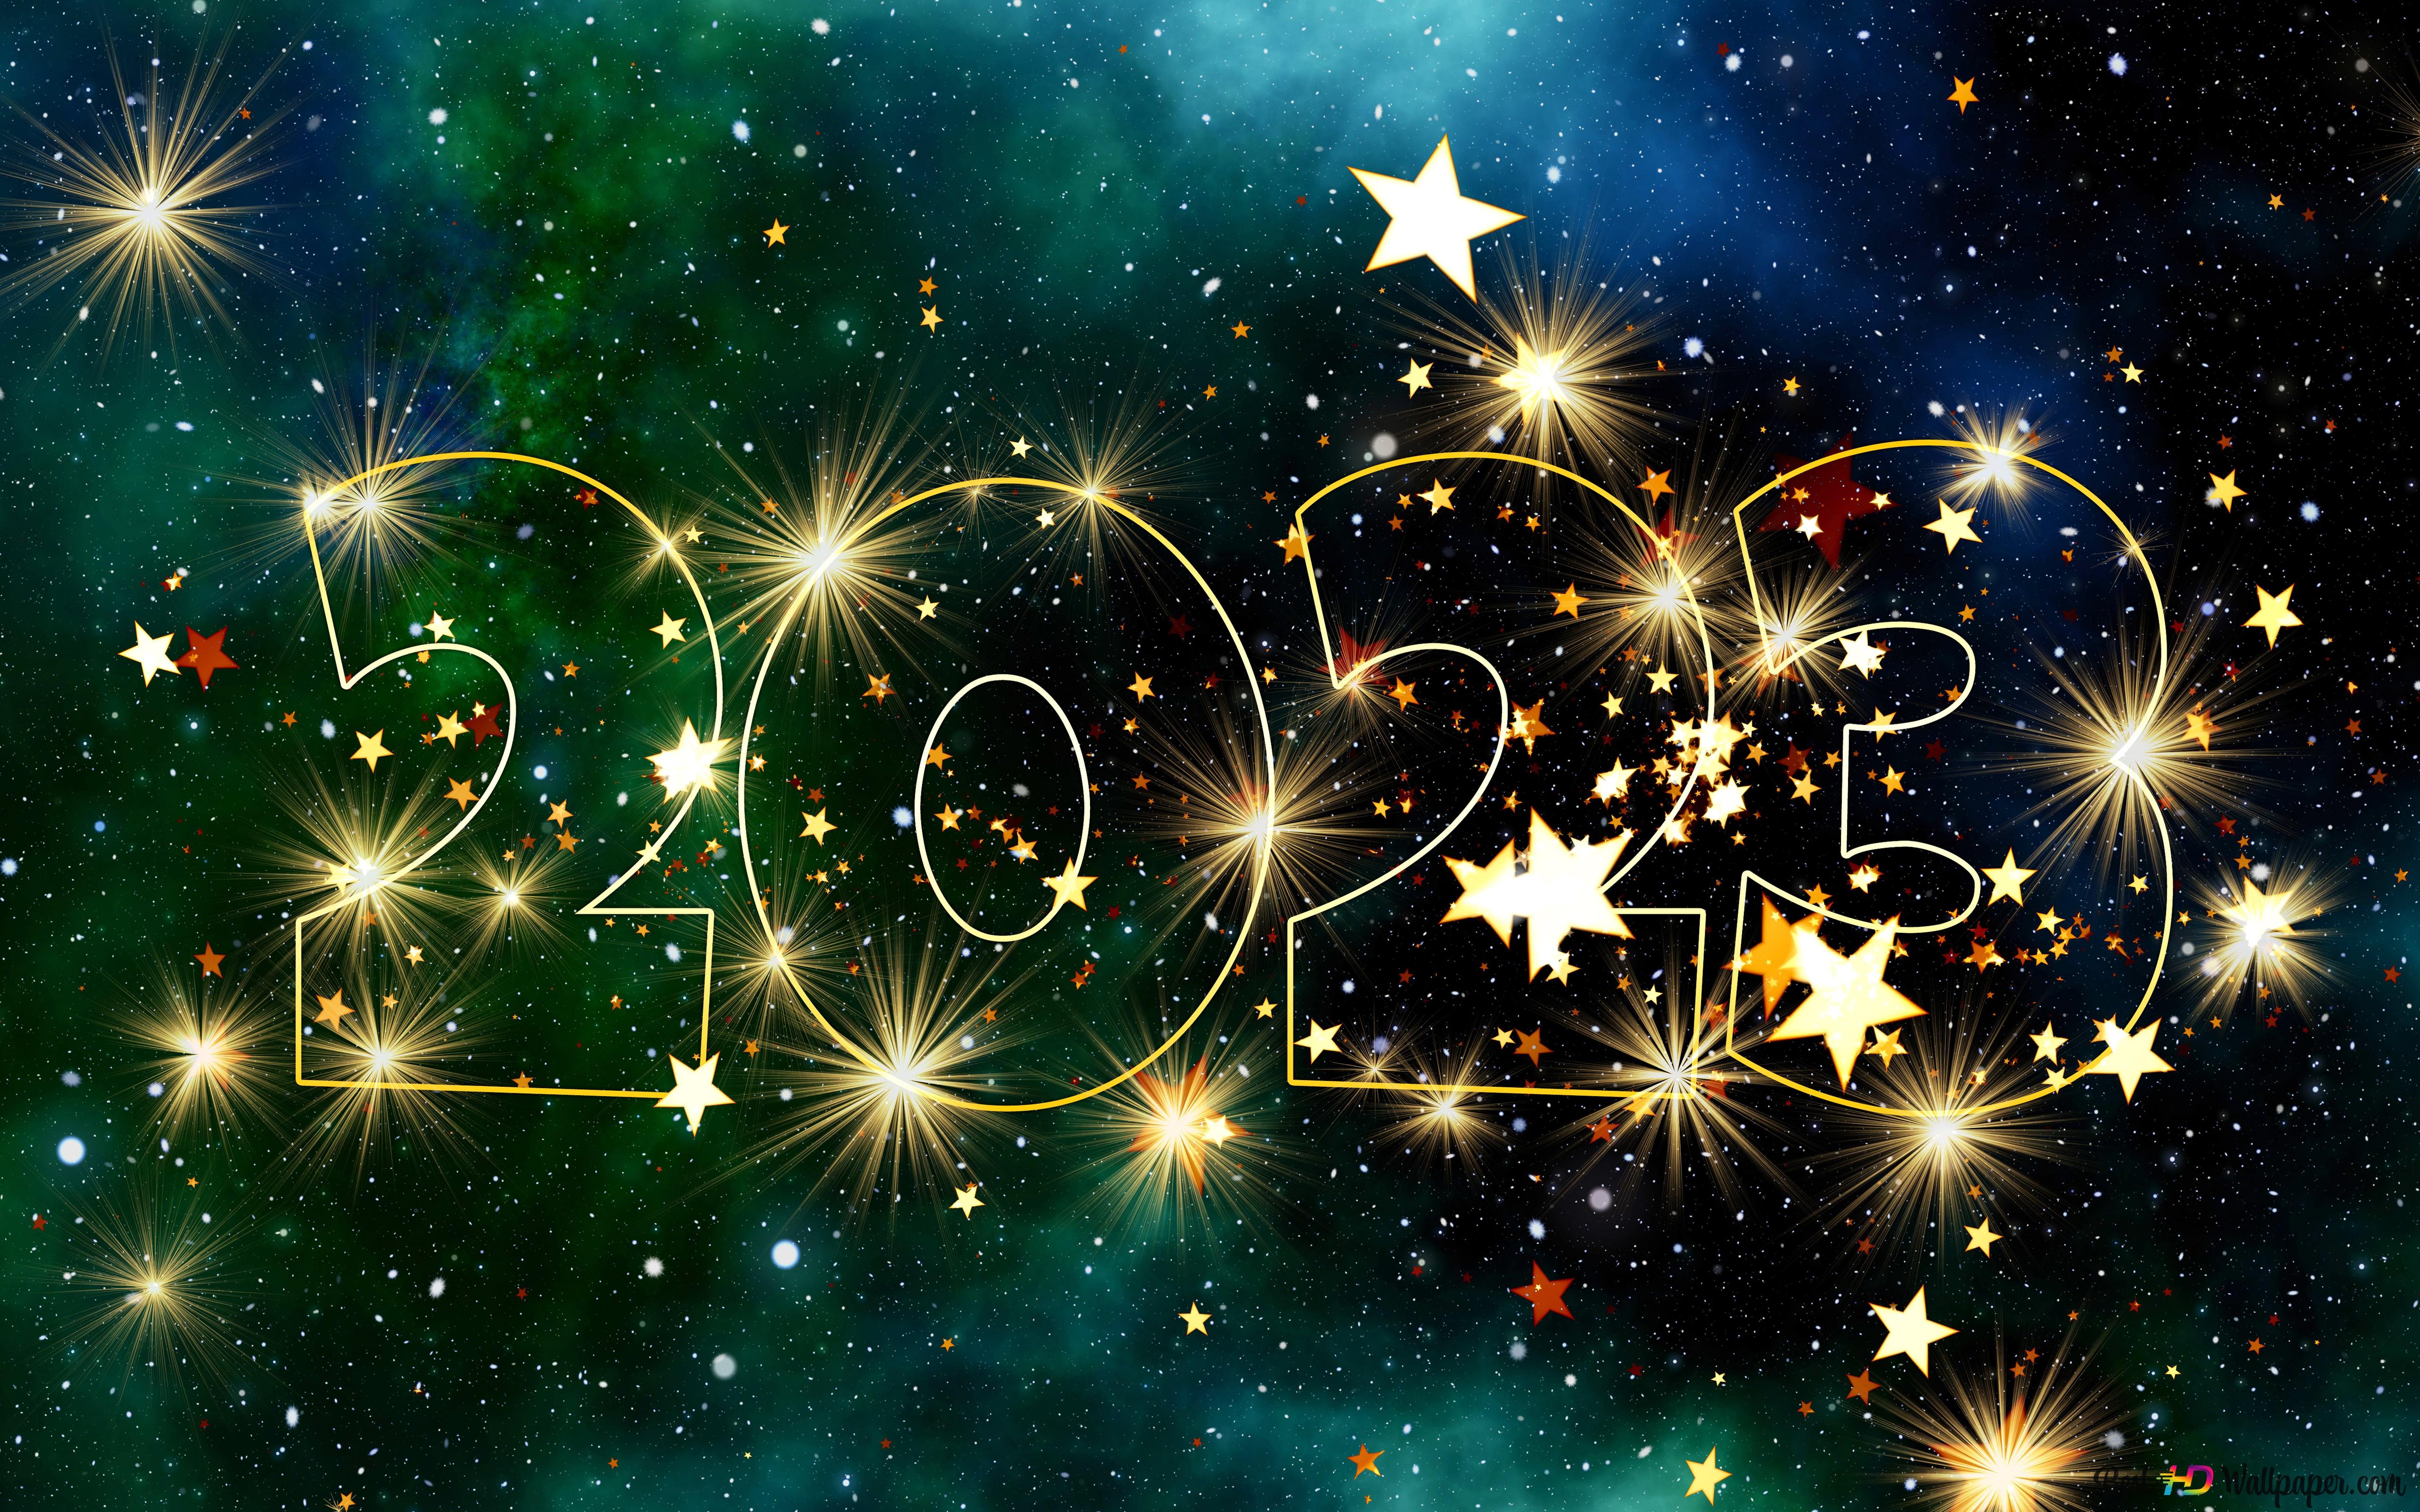 2023 lettering made of stars and a background with the universe 6K wallpaper download